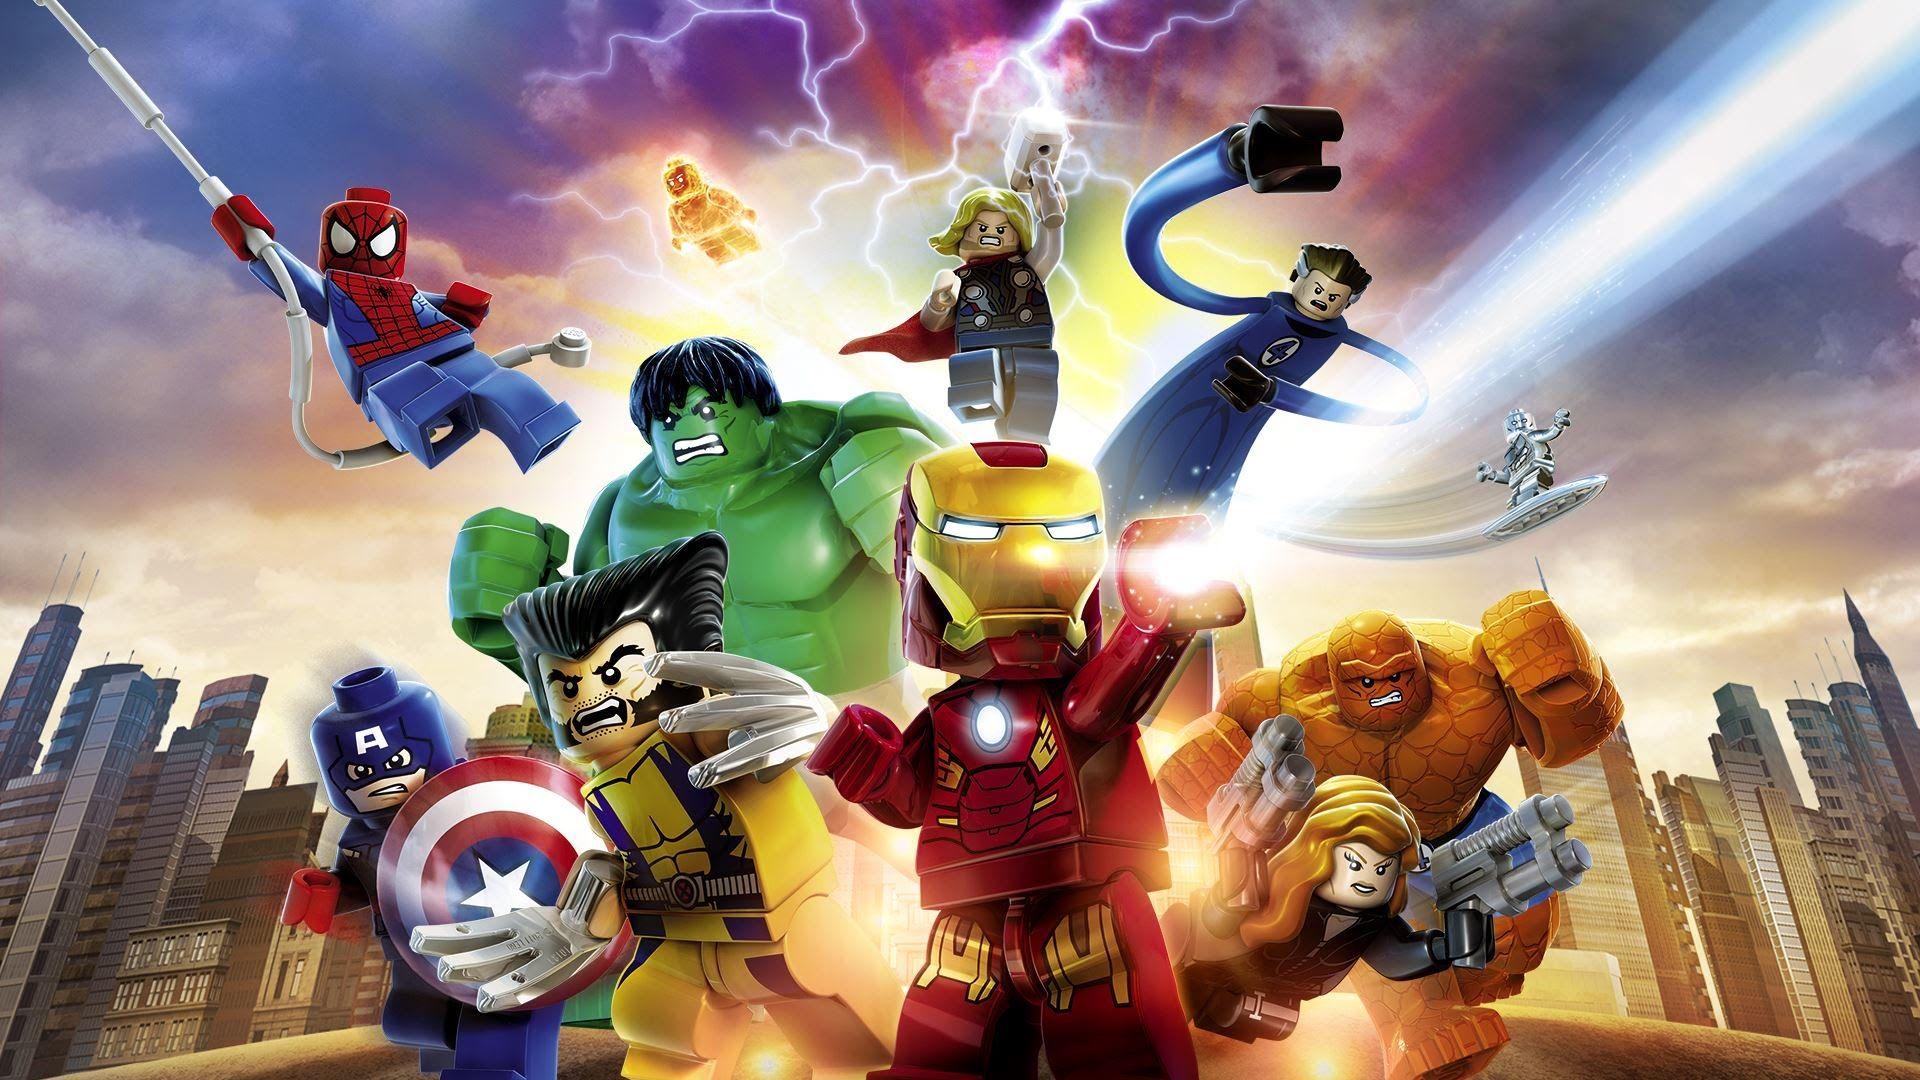 LEGO Marvel Super Heroes - İos / Android / Windows Phone Gameplay